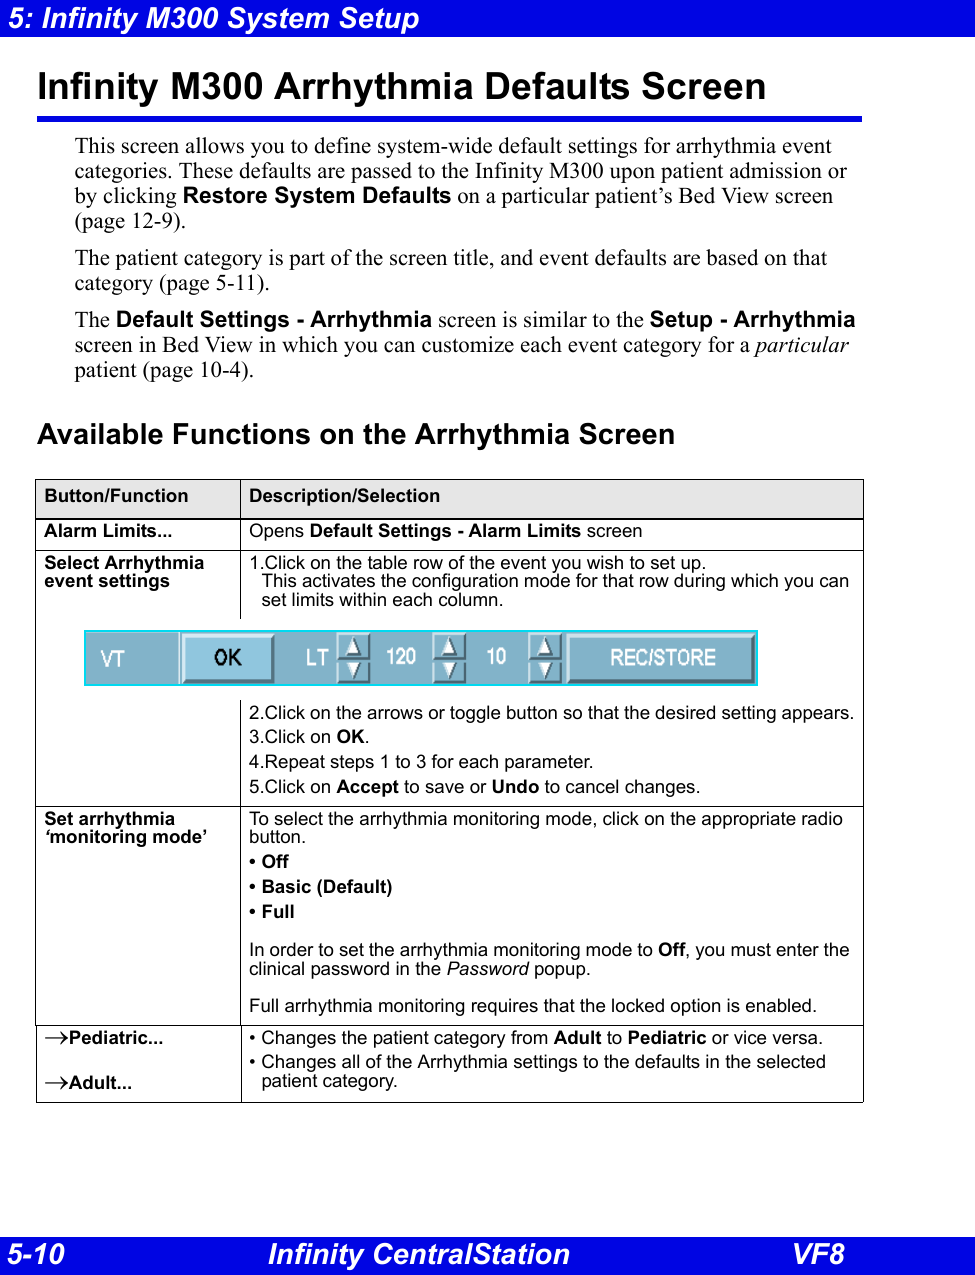 5-10 Infinity CentralStation VF85: Infinity M300 System SetupInfinity M300 Arrhythmia Defaults ScreenThis screen allows you to define system-wide default settings for arrhythmia event categories. These defaults are passed to the Infinity M300 upon patient admission or by clicking Restore System Defaults on a particular patient’s Bed View screen (page 12-9). The patient category is part of the screen title, and event defaults are based on that category (page 5-11). The Default Settings - Arrhythmia screen is similar to the Setup - Arrhythmia screen in Bed View in which you can customize each event category for a particular patient (page 10-4).Available Functions on the Arrhythmia ScreenButton/Function Description/SelectionAlarm Limits... Opens Default Settings - Alarm Limits screenSelect Arrhythmia event settings1.Click on the table row of the event you wish to set up. This activates the configuration mode for that row during which you can set limits within each column.2.Click on the arrows or toggle button so that the desired setting appears.3.Click on OK.4.Repeat steps 1 to 3 for each parameter.5.Click on Accept to save or Undo to cancel changes.Set arrhythmia ‘monitoring mode’To select the arrhythmia monitoring mode, click on the appropriate radio button.•Off• Basic (Default)•FullIn order to set the arrhythmia monitoring mode to Off, you must enter the clinical password in the Password popup.Full arrhythmia monitoring requires that the locked option is enabled.→Pediatric...→Adult...• Changes the patient category from Adult to Pediatric or vice versa.  • Changes all of the Arrhythmia settings to the defaults in the selected patient category.